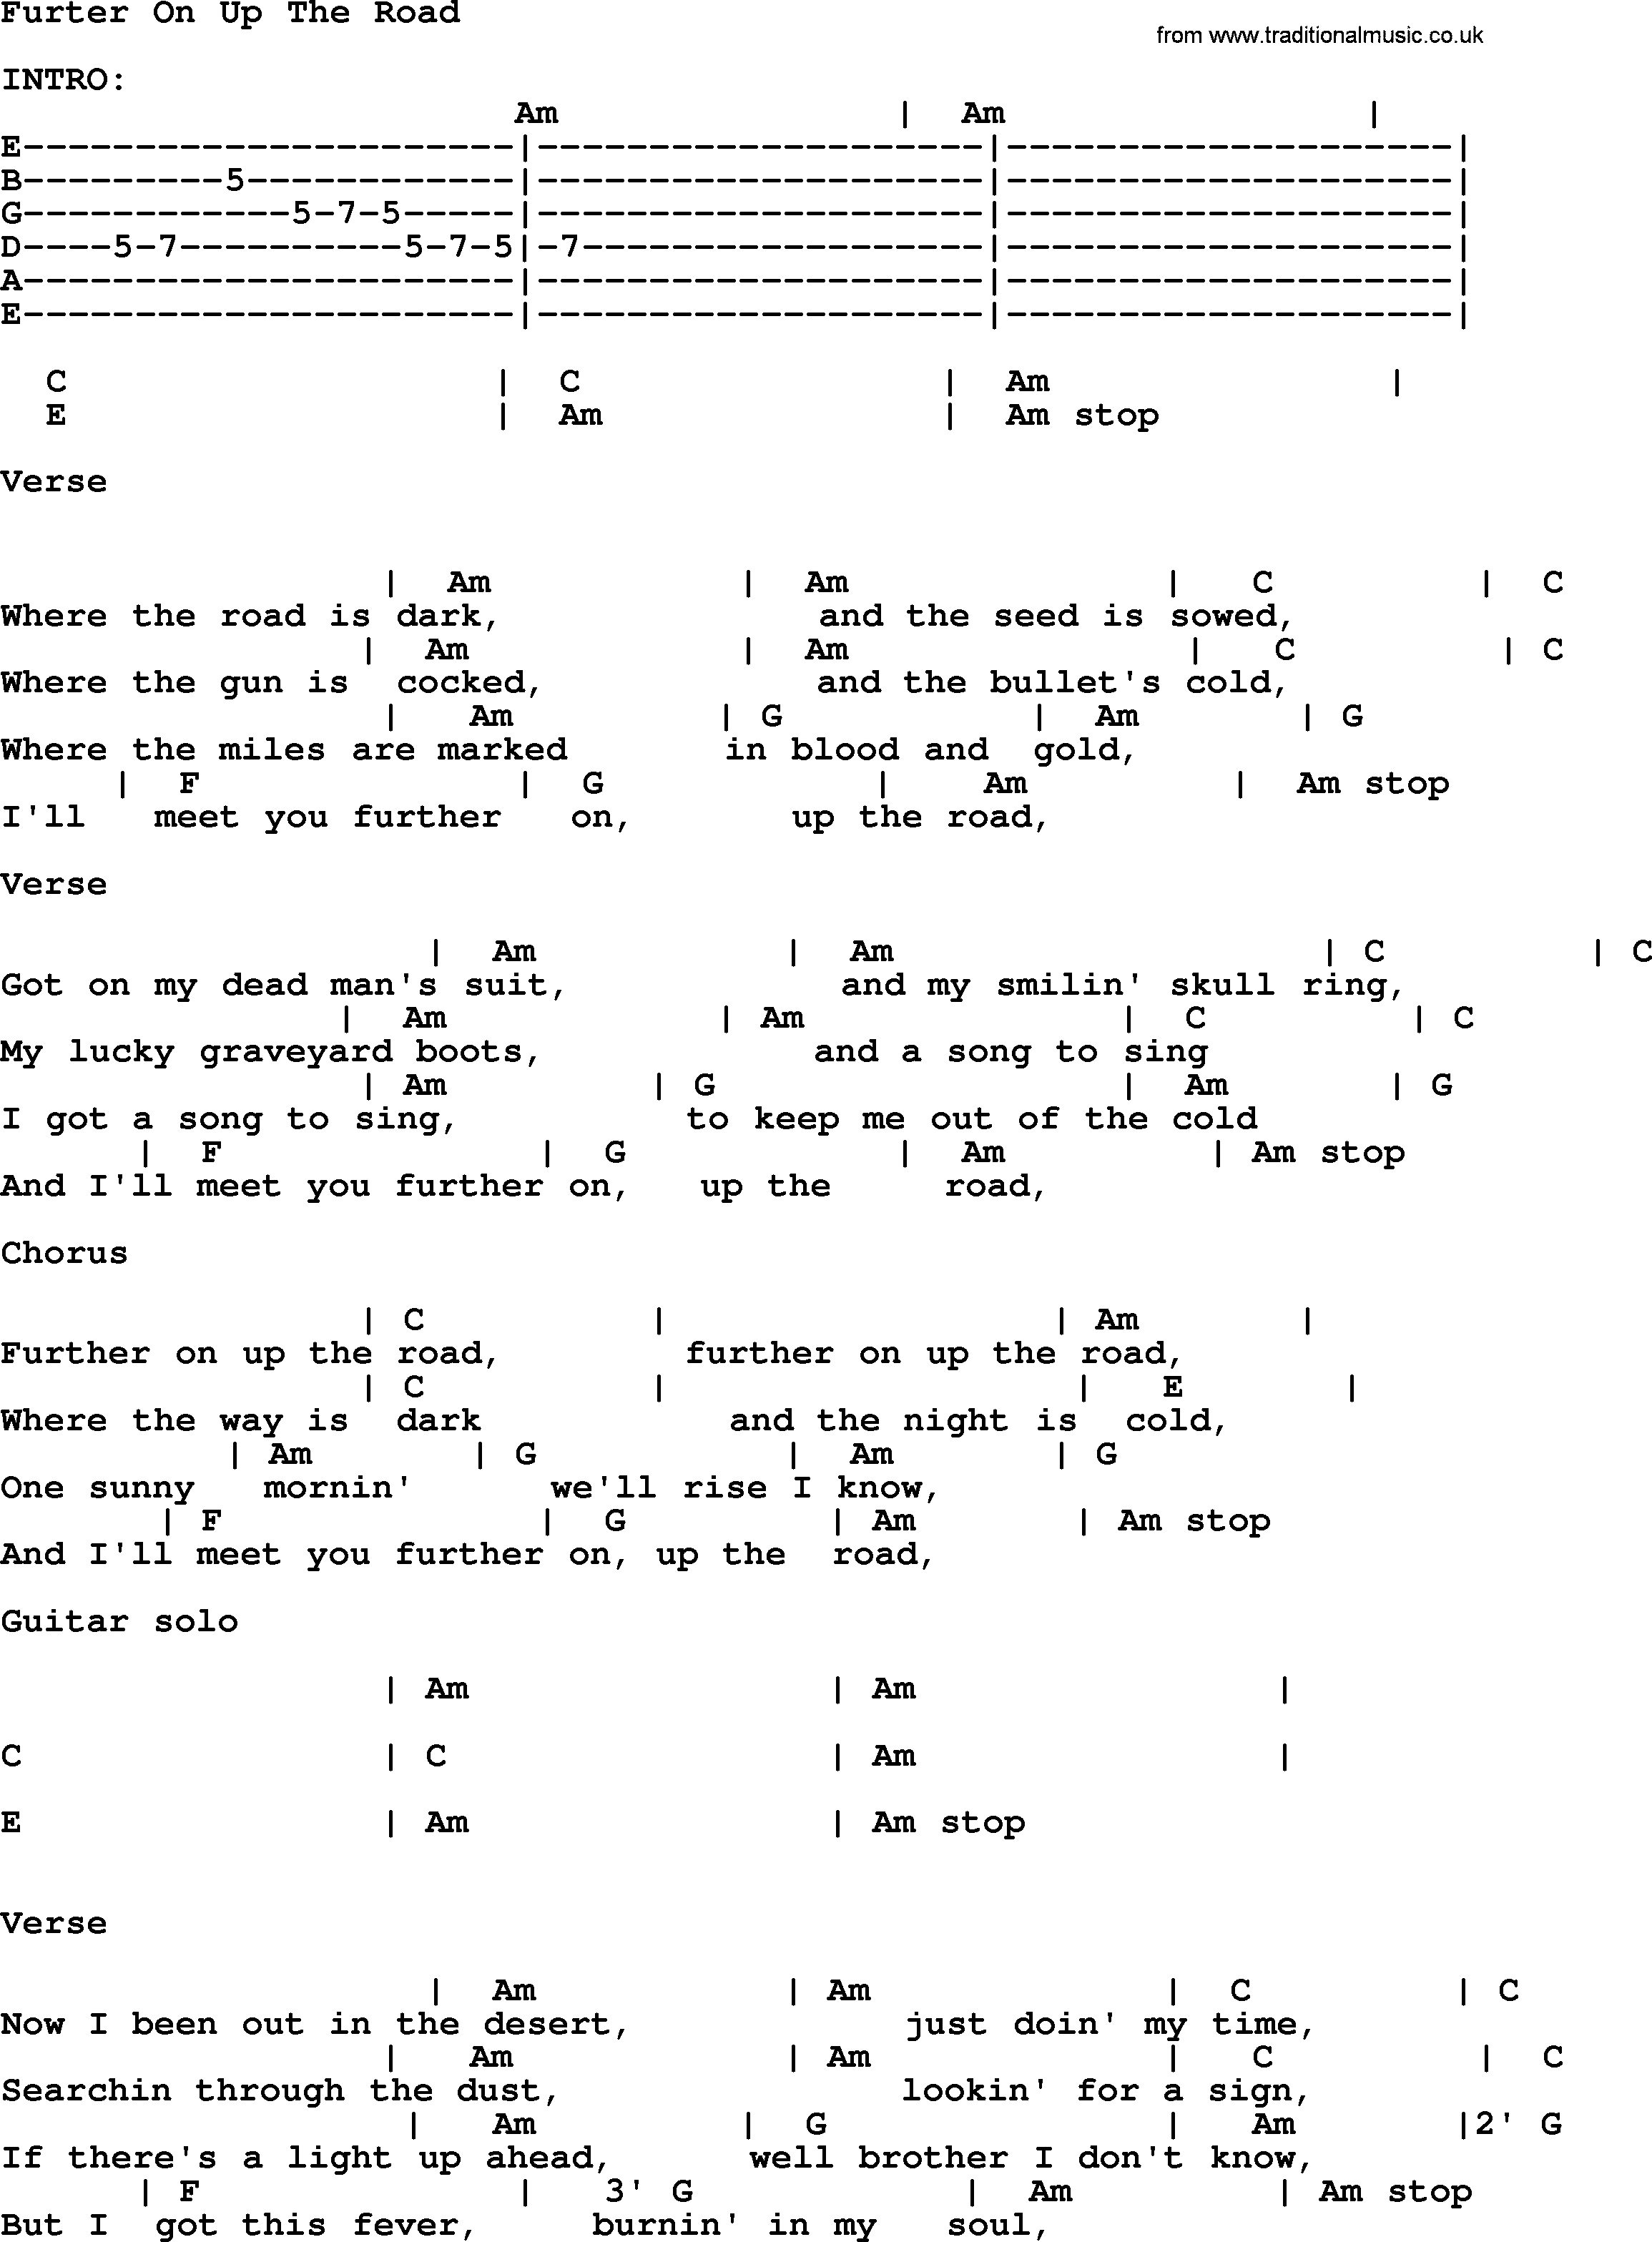 Johnny Cash song Further On Up The Road(2), lyrics and chords